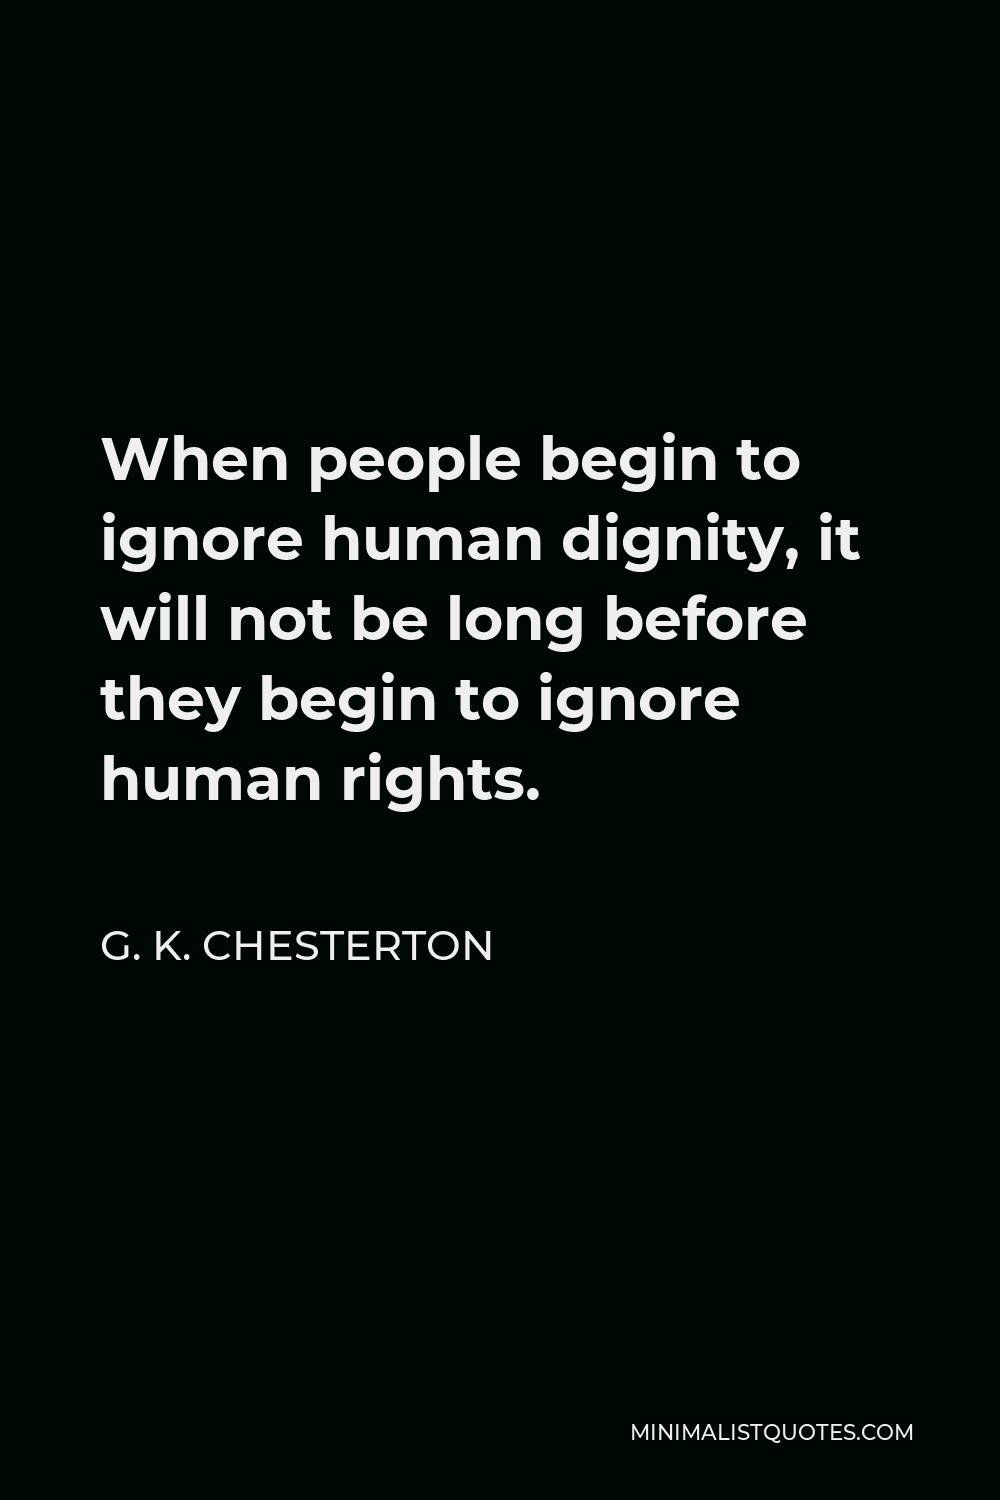 G. K. Chesterton Quote - When people begin to ignore human dignity, it will not be long before they begin to ignore human rights.